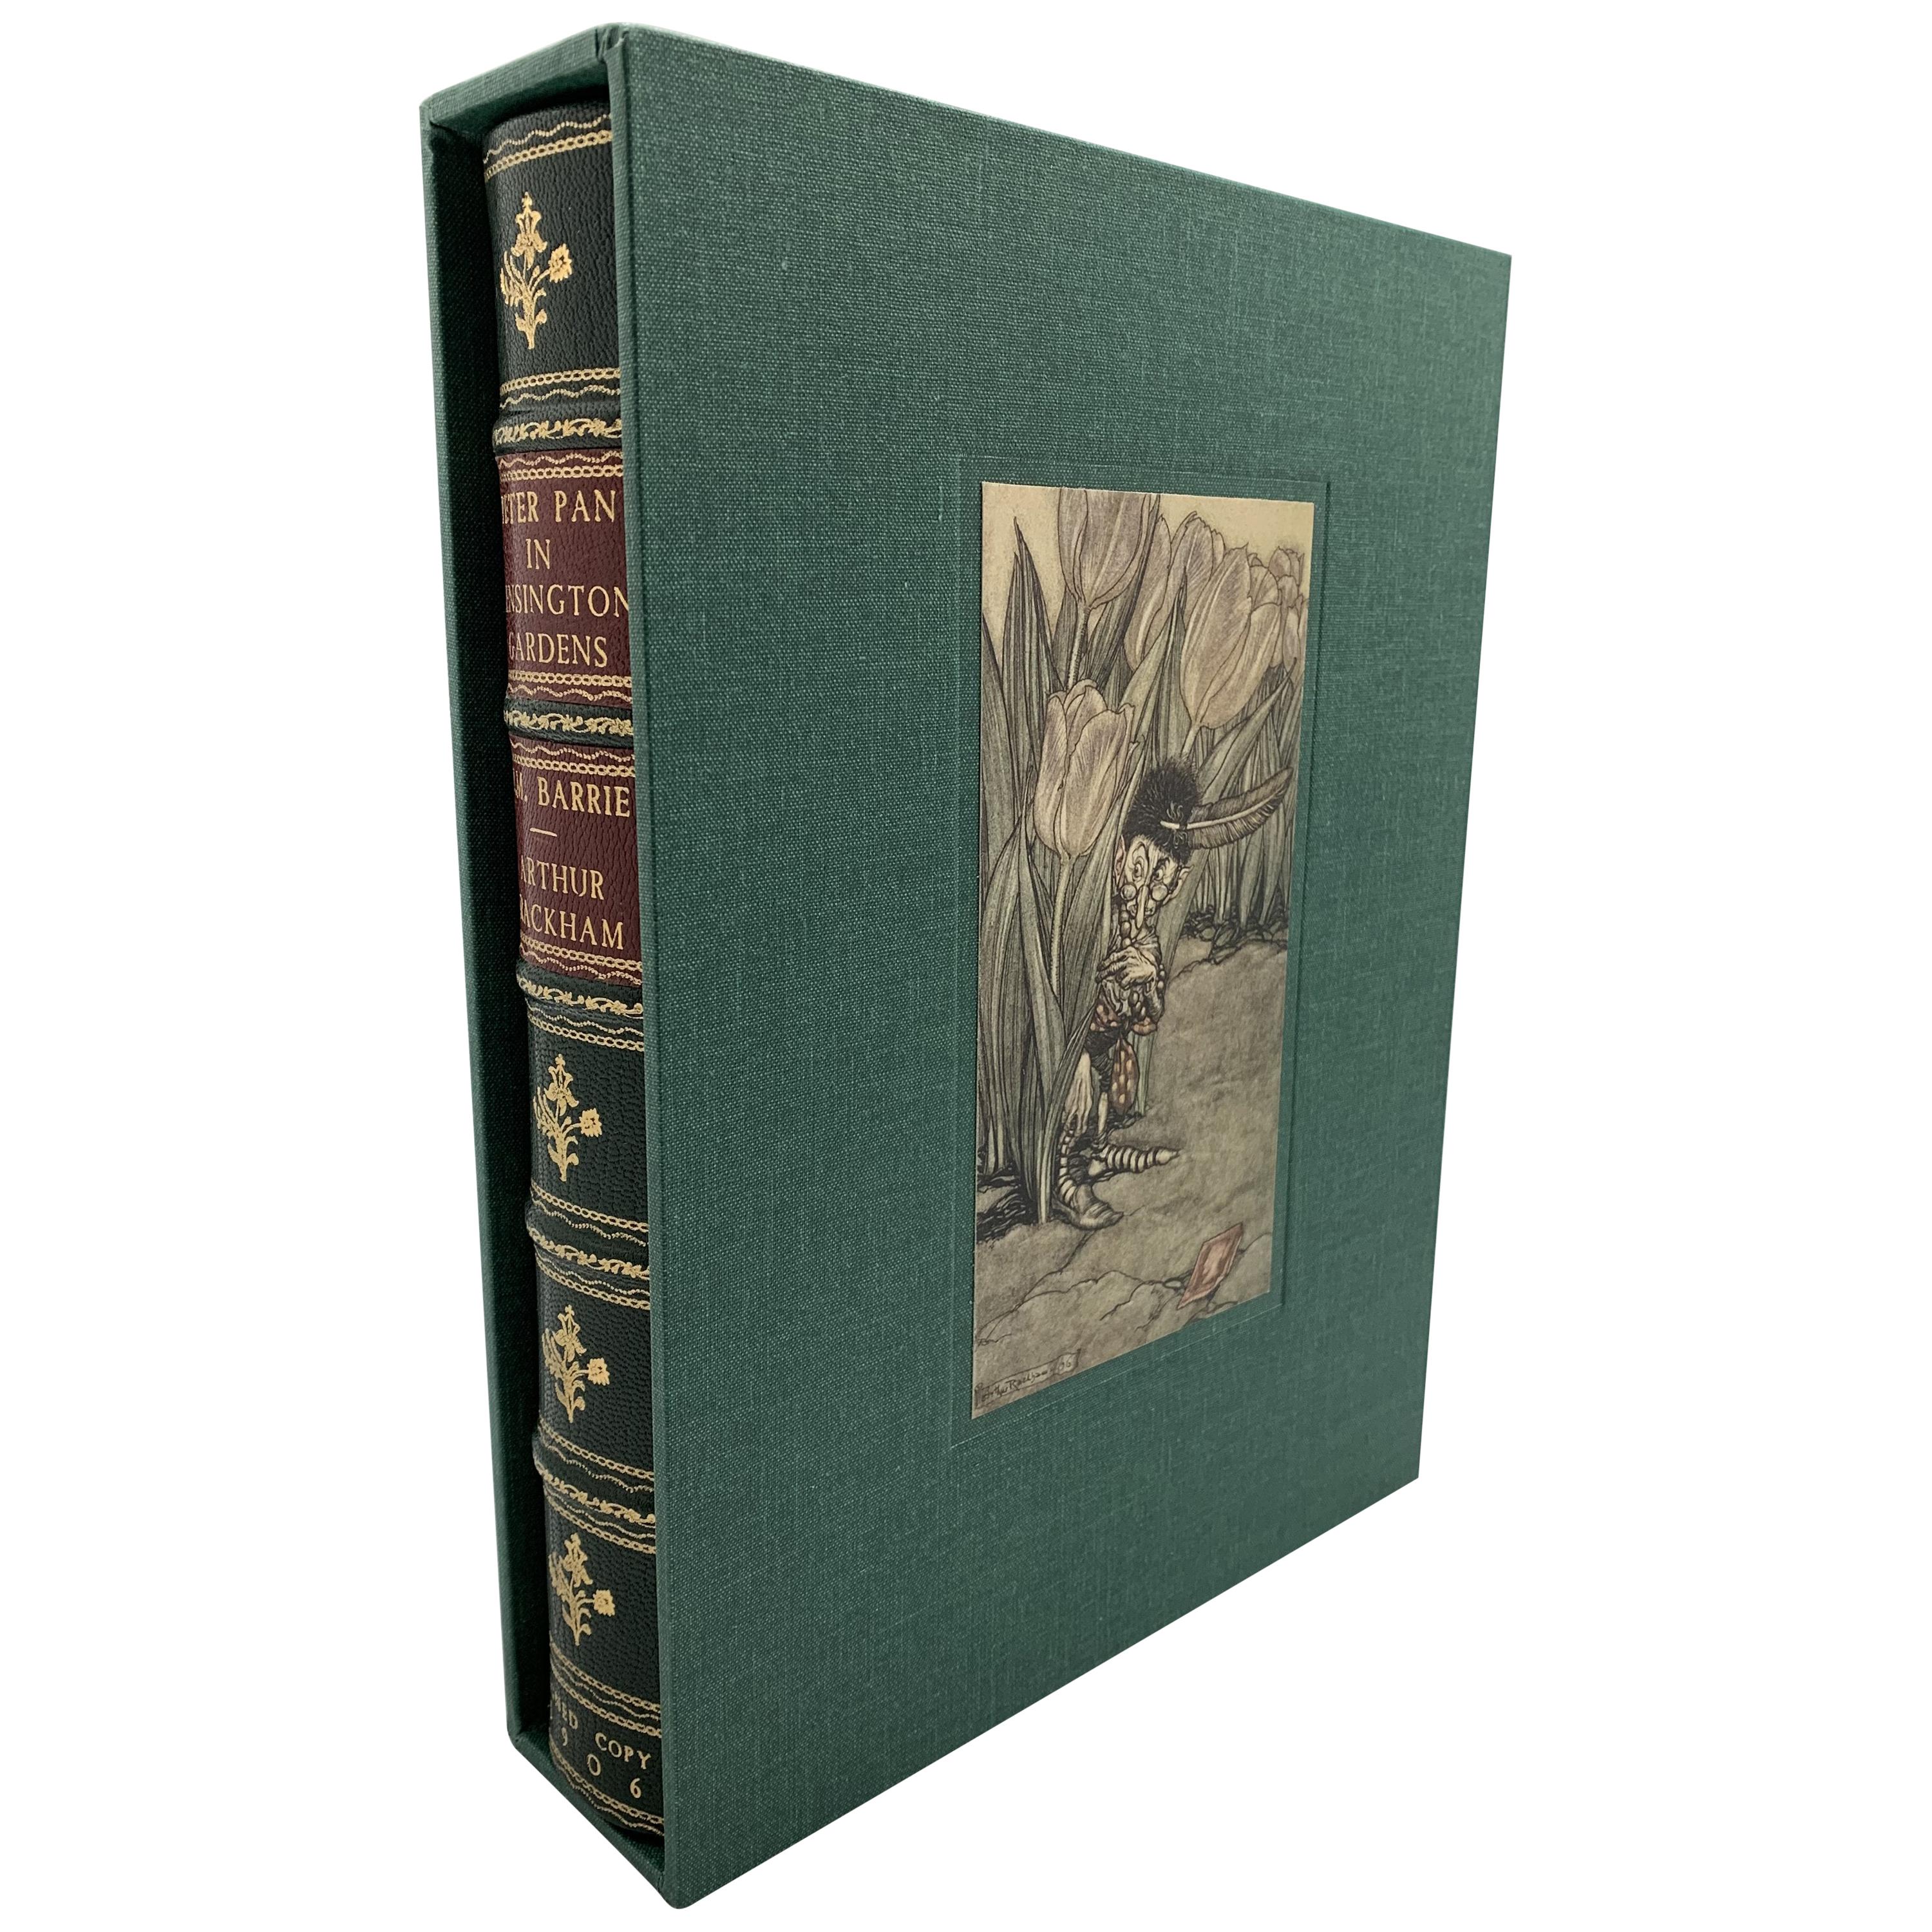 Barrie, J. M., Illustrated by Arthur Rackam, Peter Pan in Kensington Gardens. New York: Charles Scribner’s Sons, 1907. First American edition, Signed by Barrie.

This is a first American edition of Peter Pan in Kensington Gardens by J. M. Barrie,